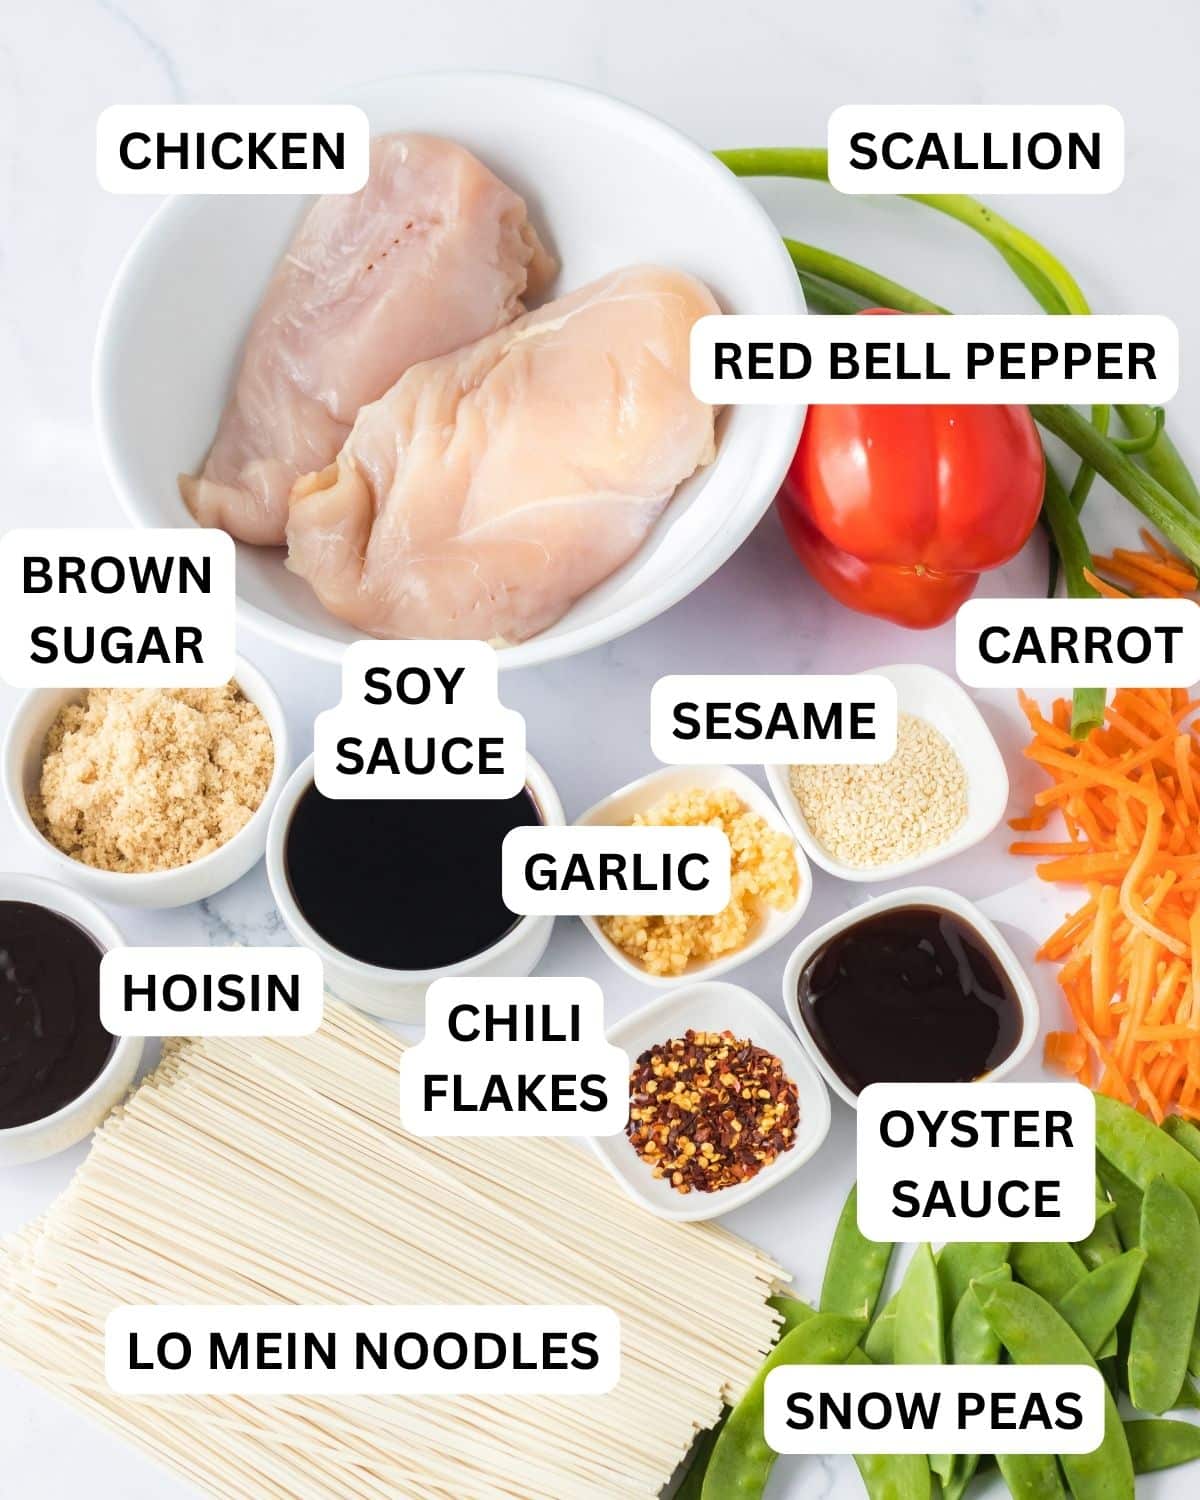 Ingredients for lo mein recipe spread out and in white prep bowls. All ingredients are labeled with text overlay.